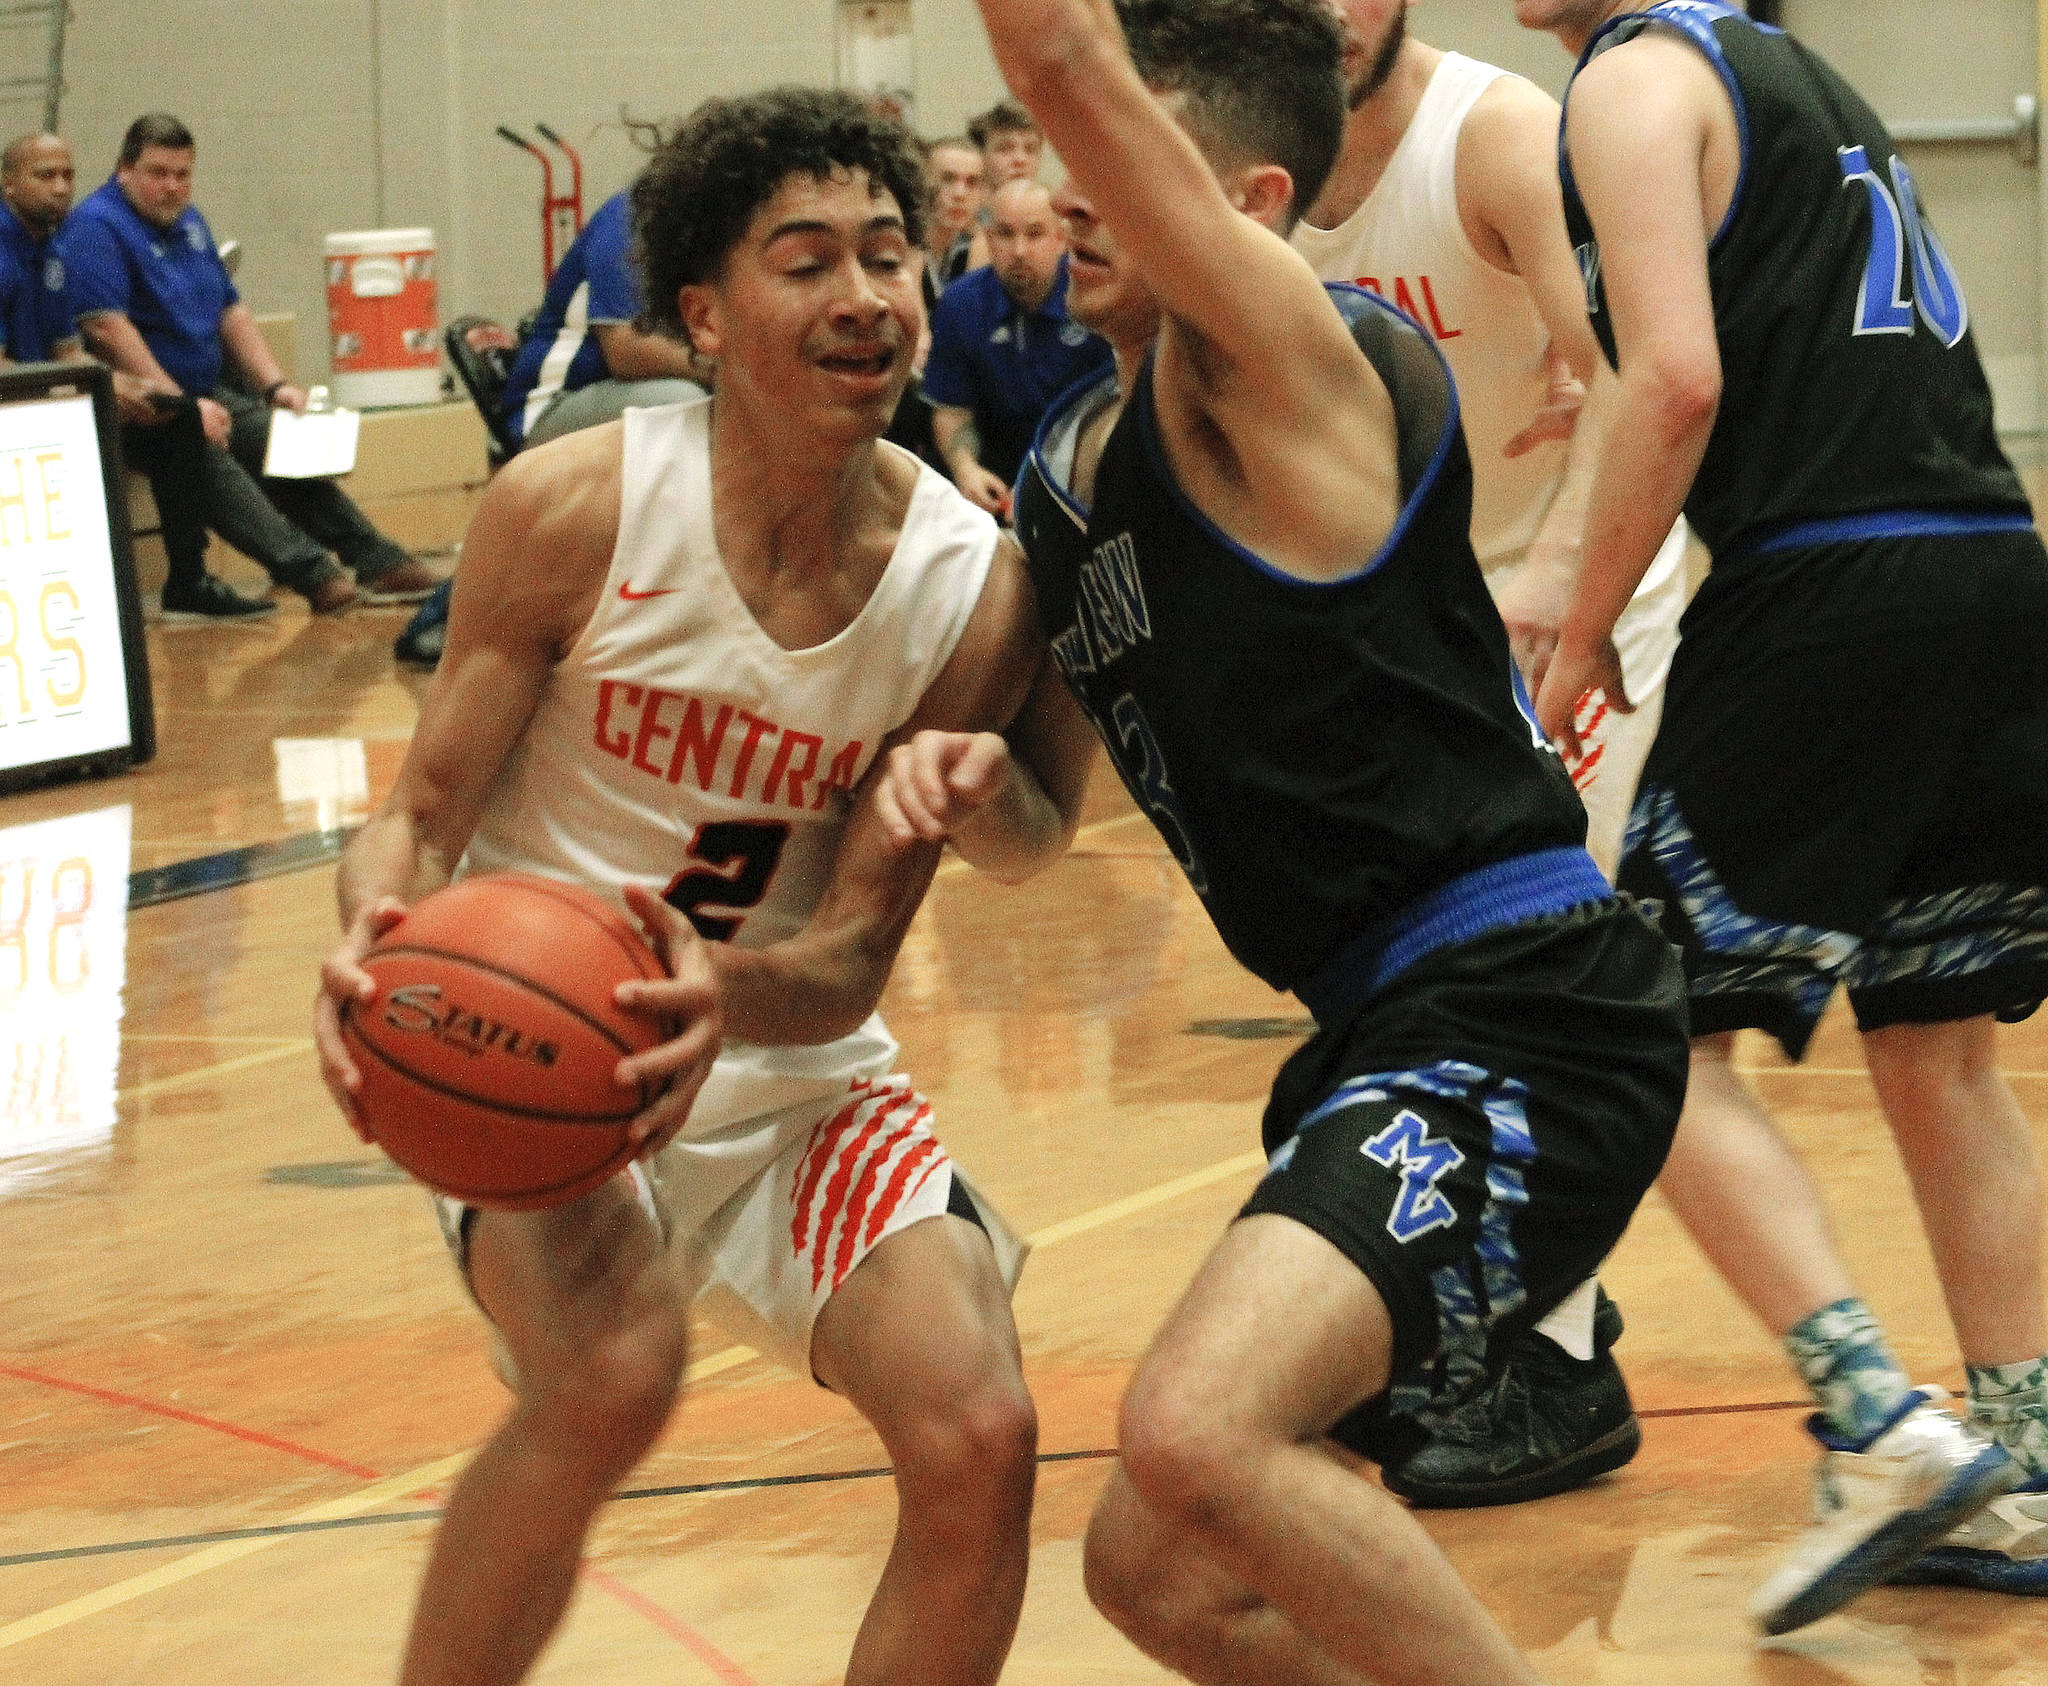 Owen Davies drives to the basket against Mountain View. The Cougars comeback effort fell short in an 80-77 loss. (Mark Krulish/Kitsap News Group)